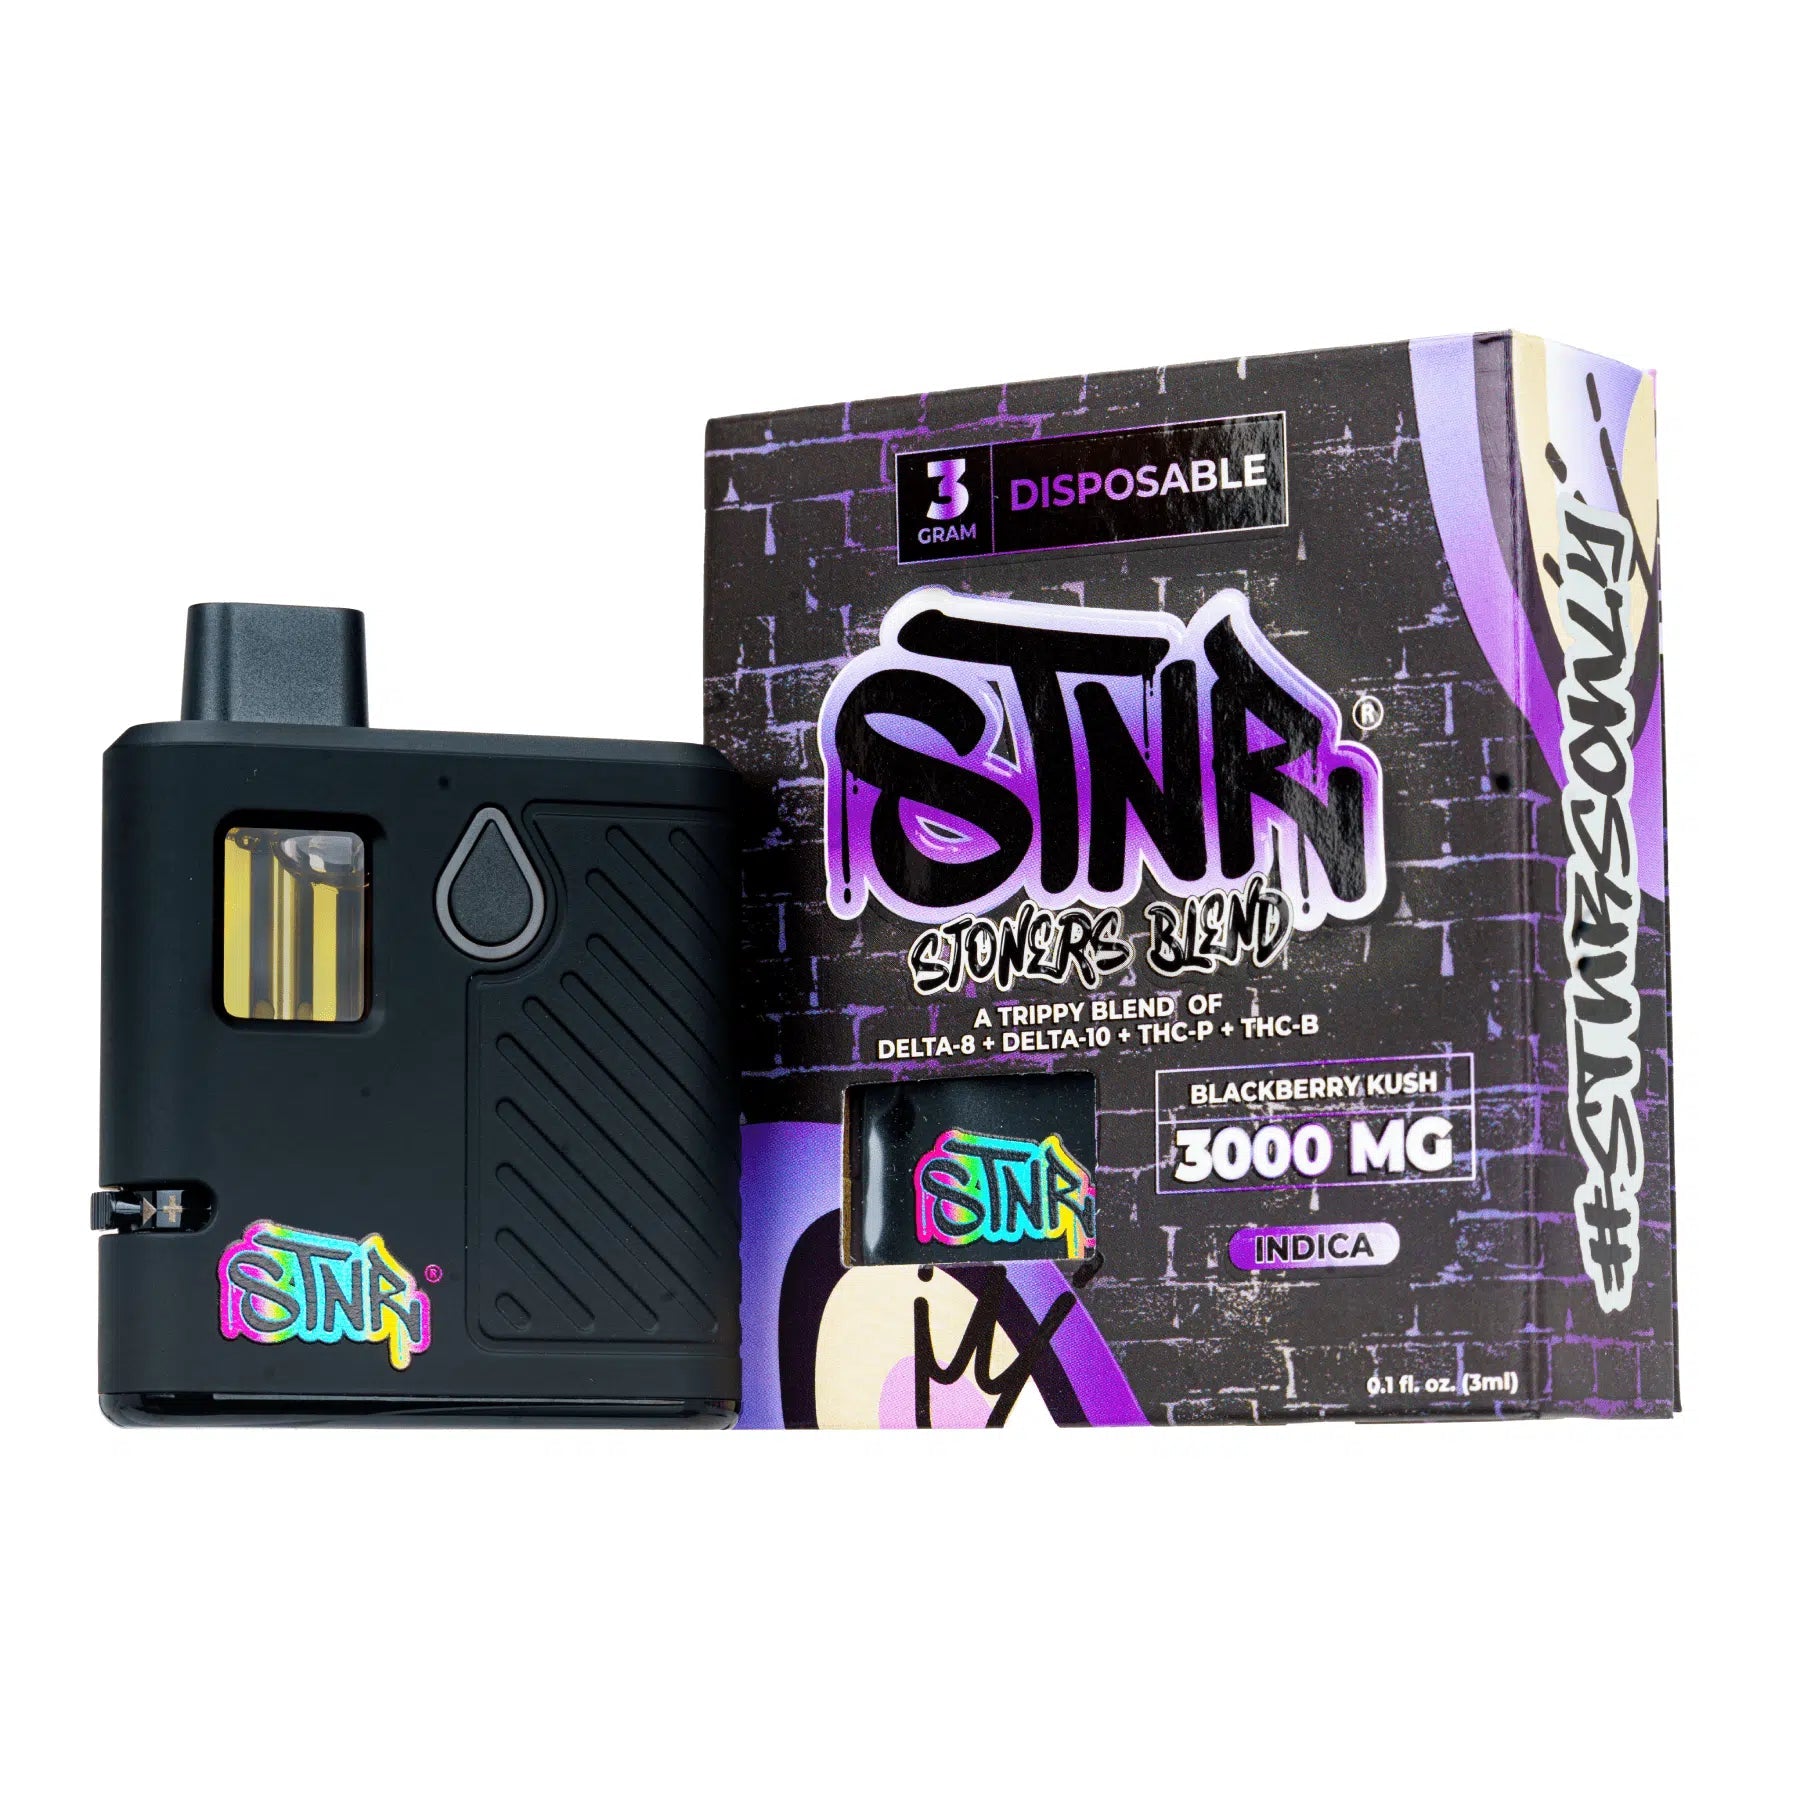 STNR Creations Stoners Blend Disposable Vapes (3g) Best Price